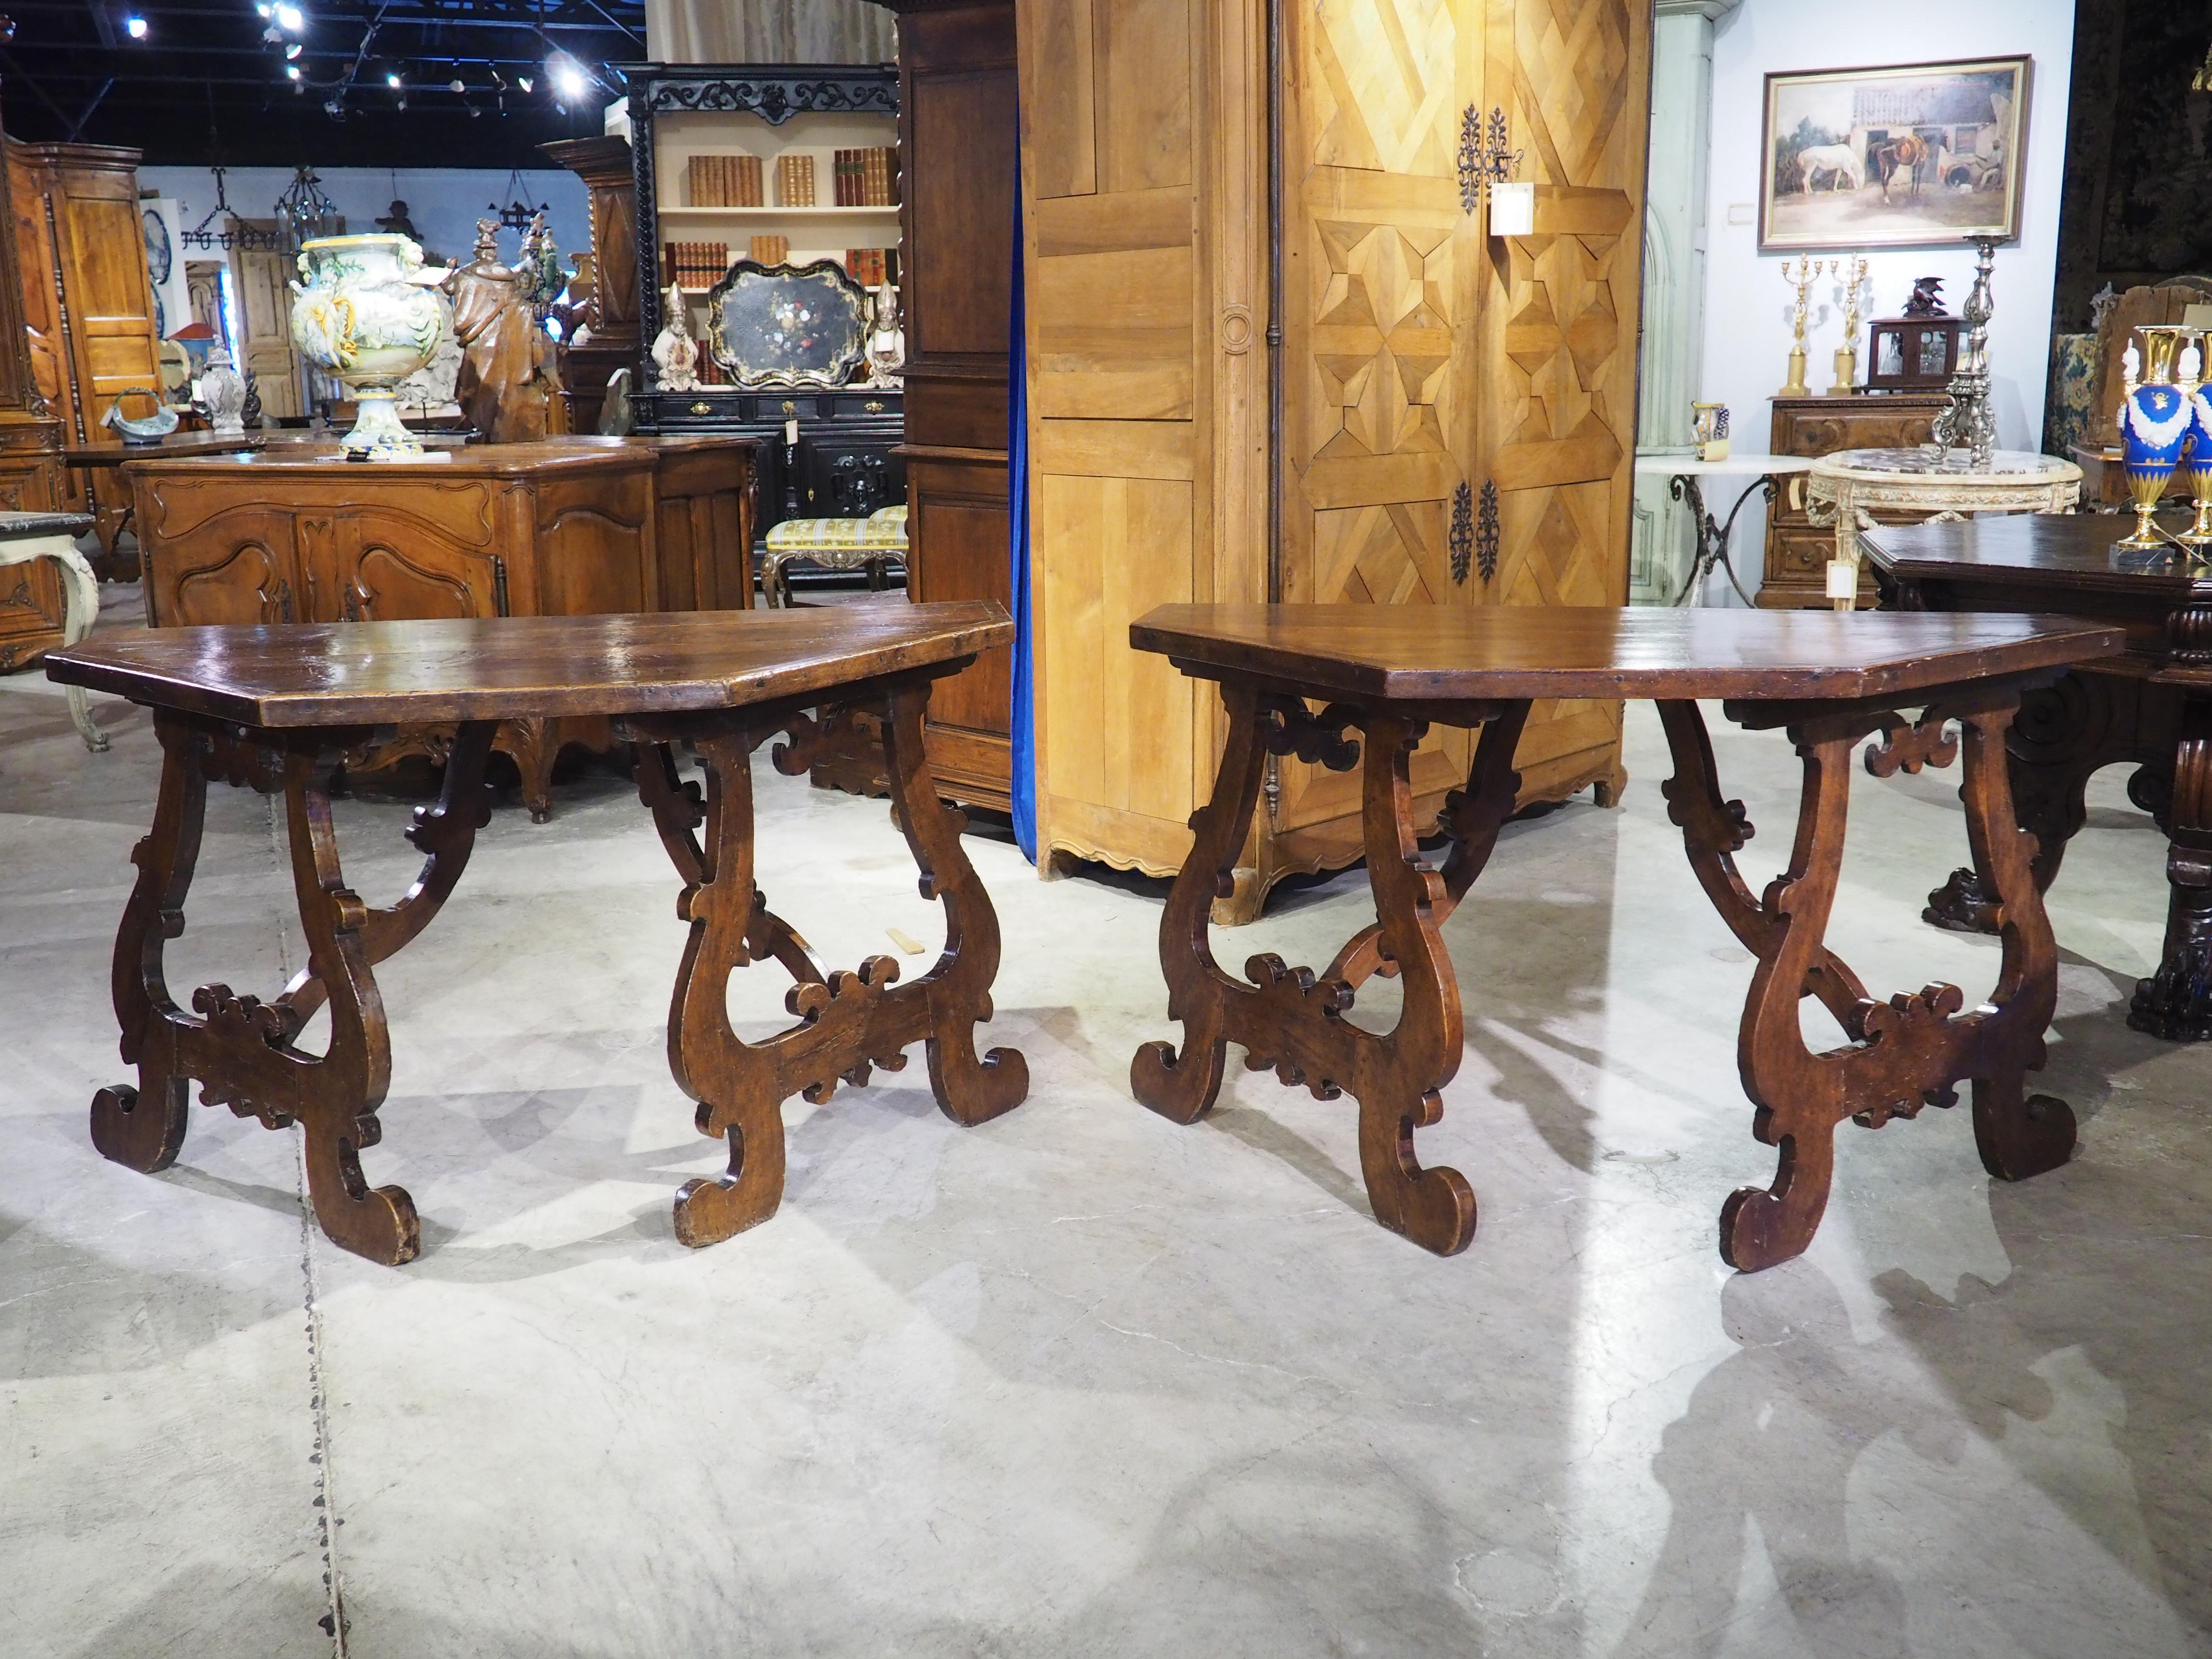 During the early stages of the Baroque period, Spanish influence began to be seen in hand-carved furniture. One such inspiration was the use of fretted lyre legs on half-round/octagonal tables, as seen in our pair of Italian consoles. These